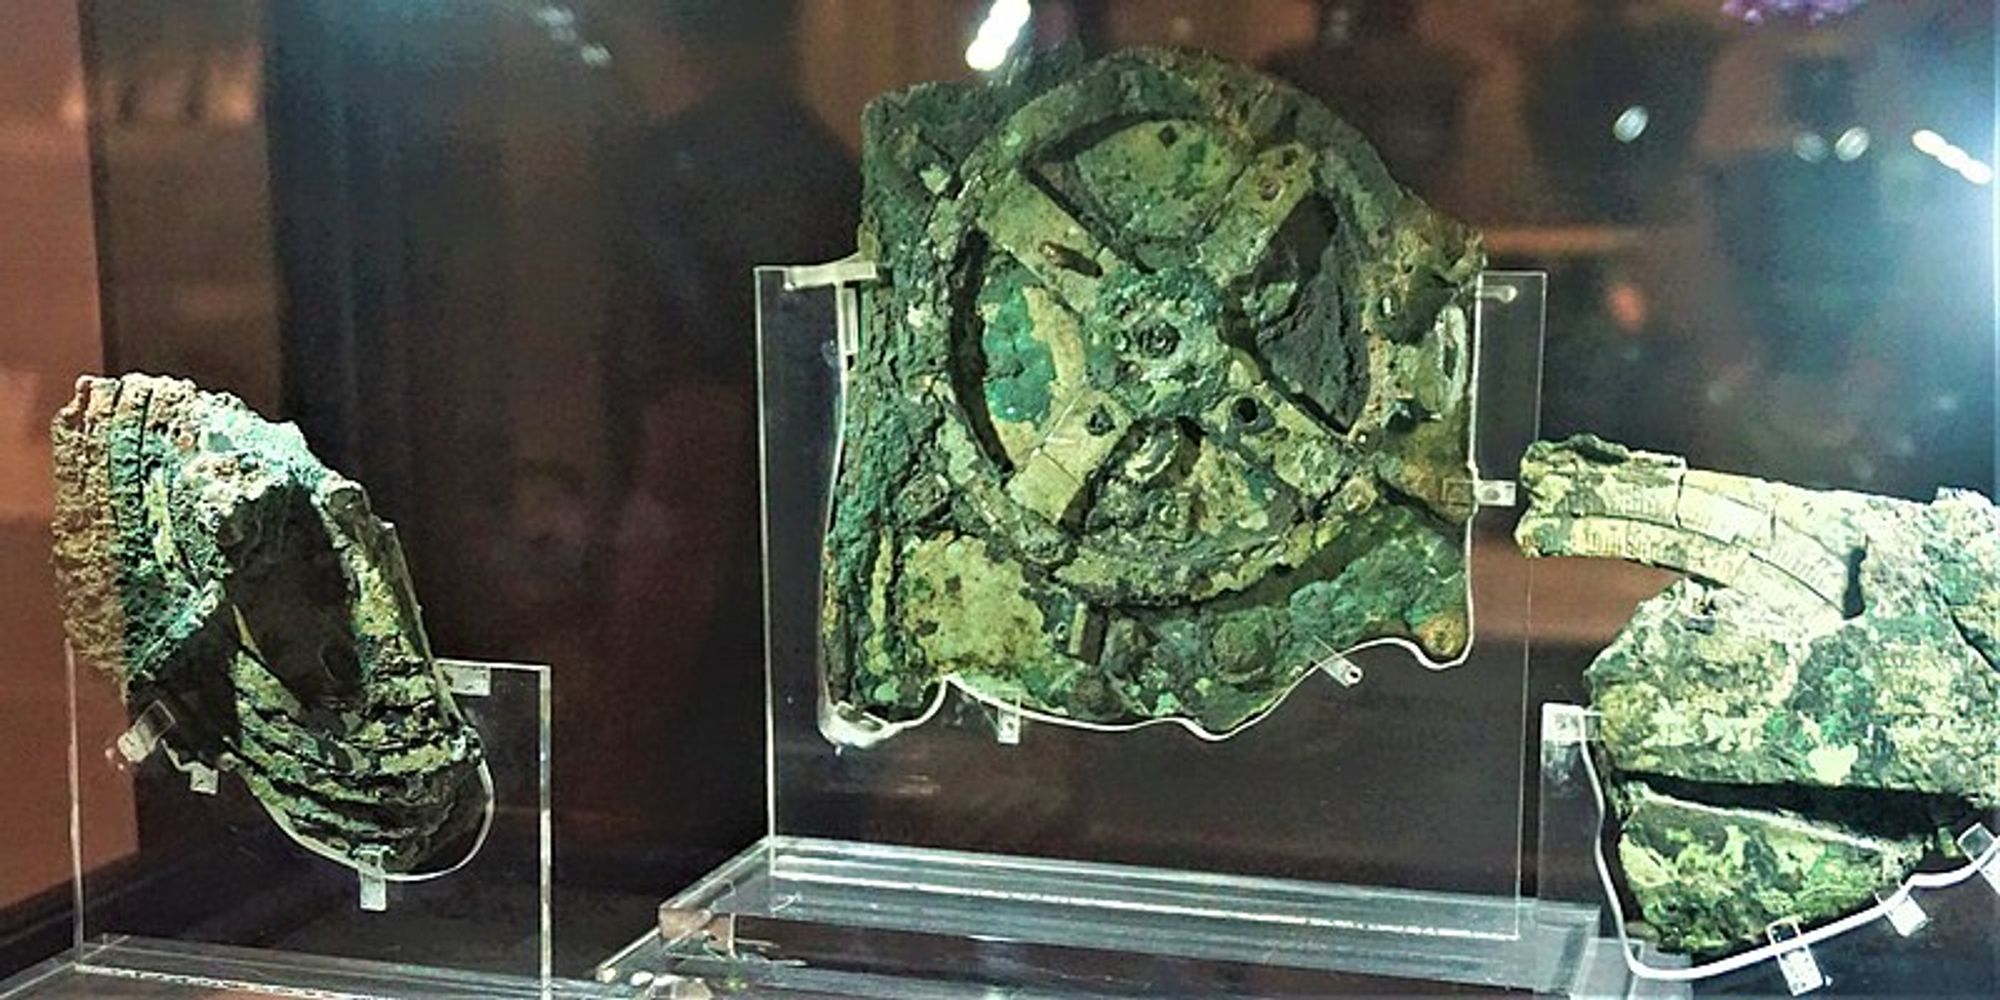 The Antikythera Mechanism, on display at the National Archaeological Museum in Athens, Greece